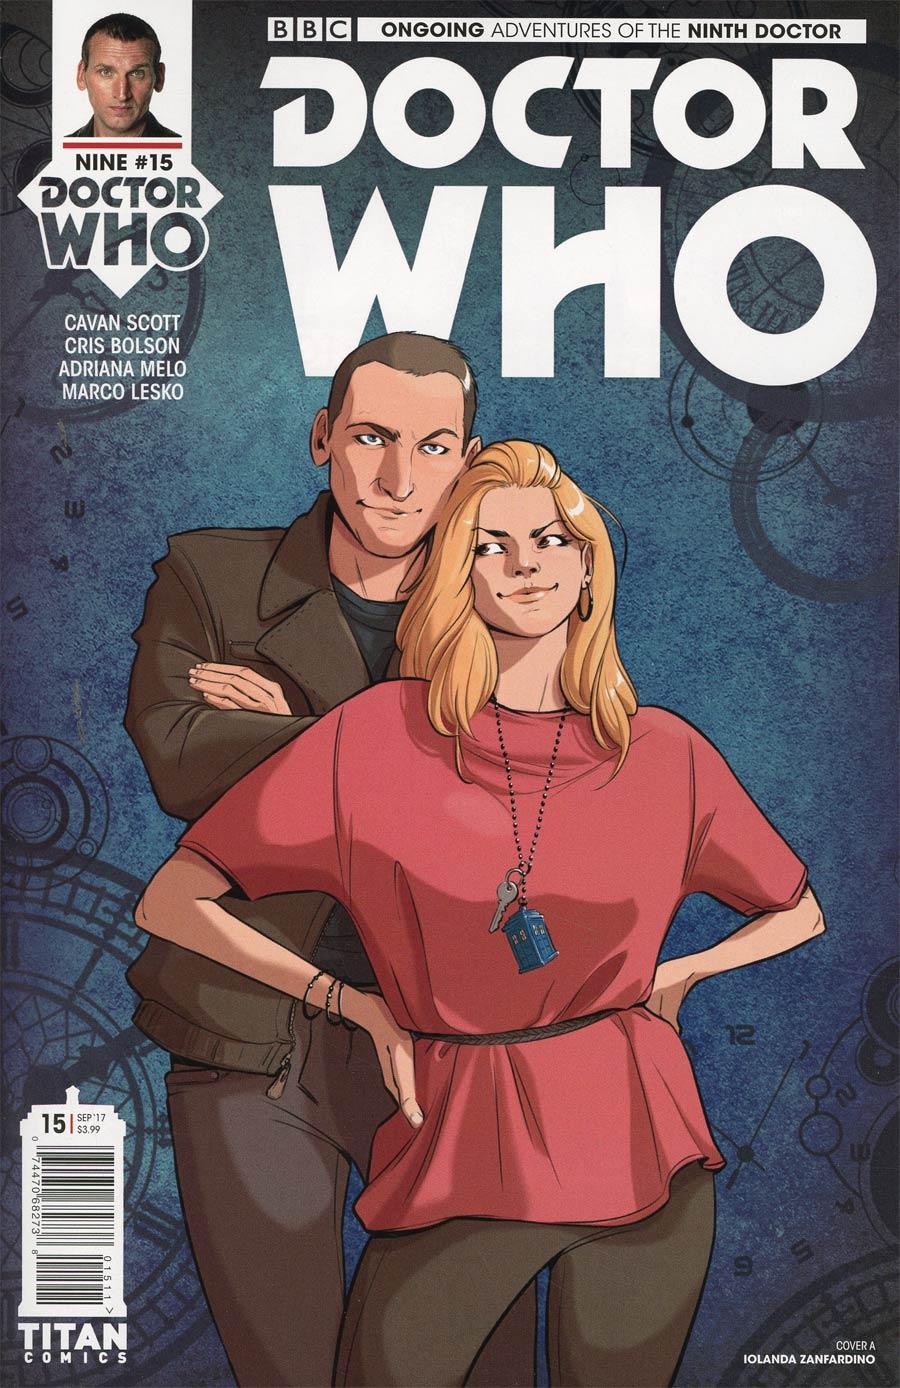 Doctor Who 9th Doctor Vol. 2 #15